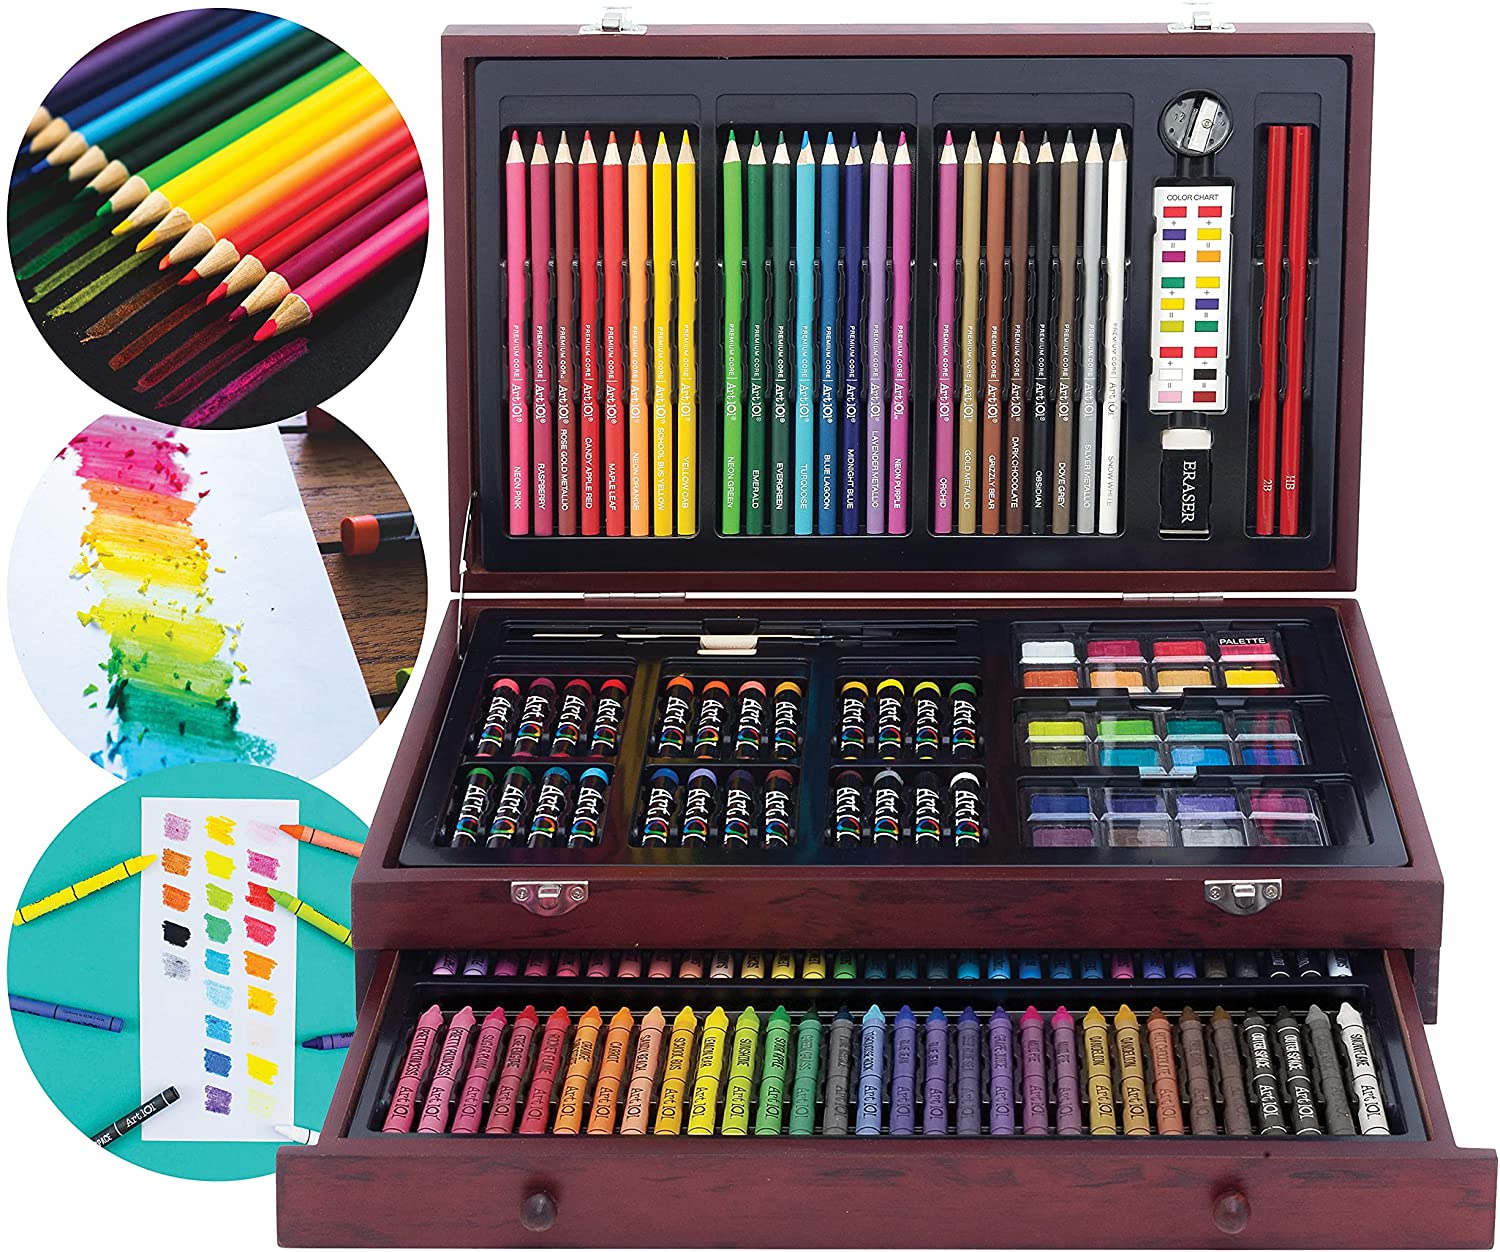 https://www.dontwasteyourmoney.com/wp-content/uploads/2022/03/art-101-painting-drawing-art-kit-for-9-12-year-olds-142-piece-art-kits-for-9-12-year-olds.jpg